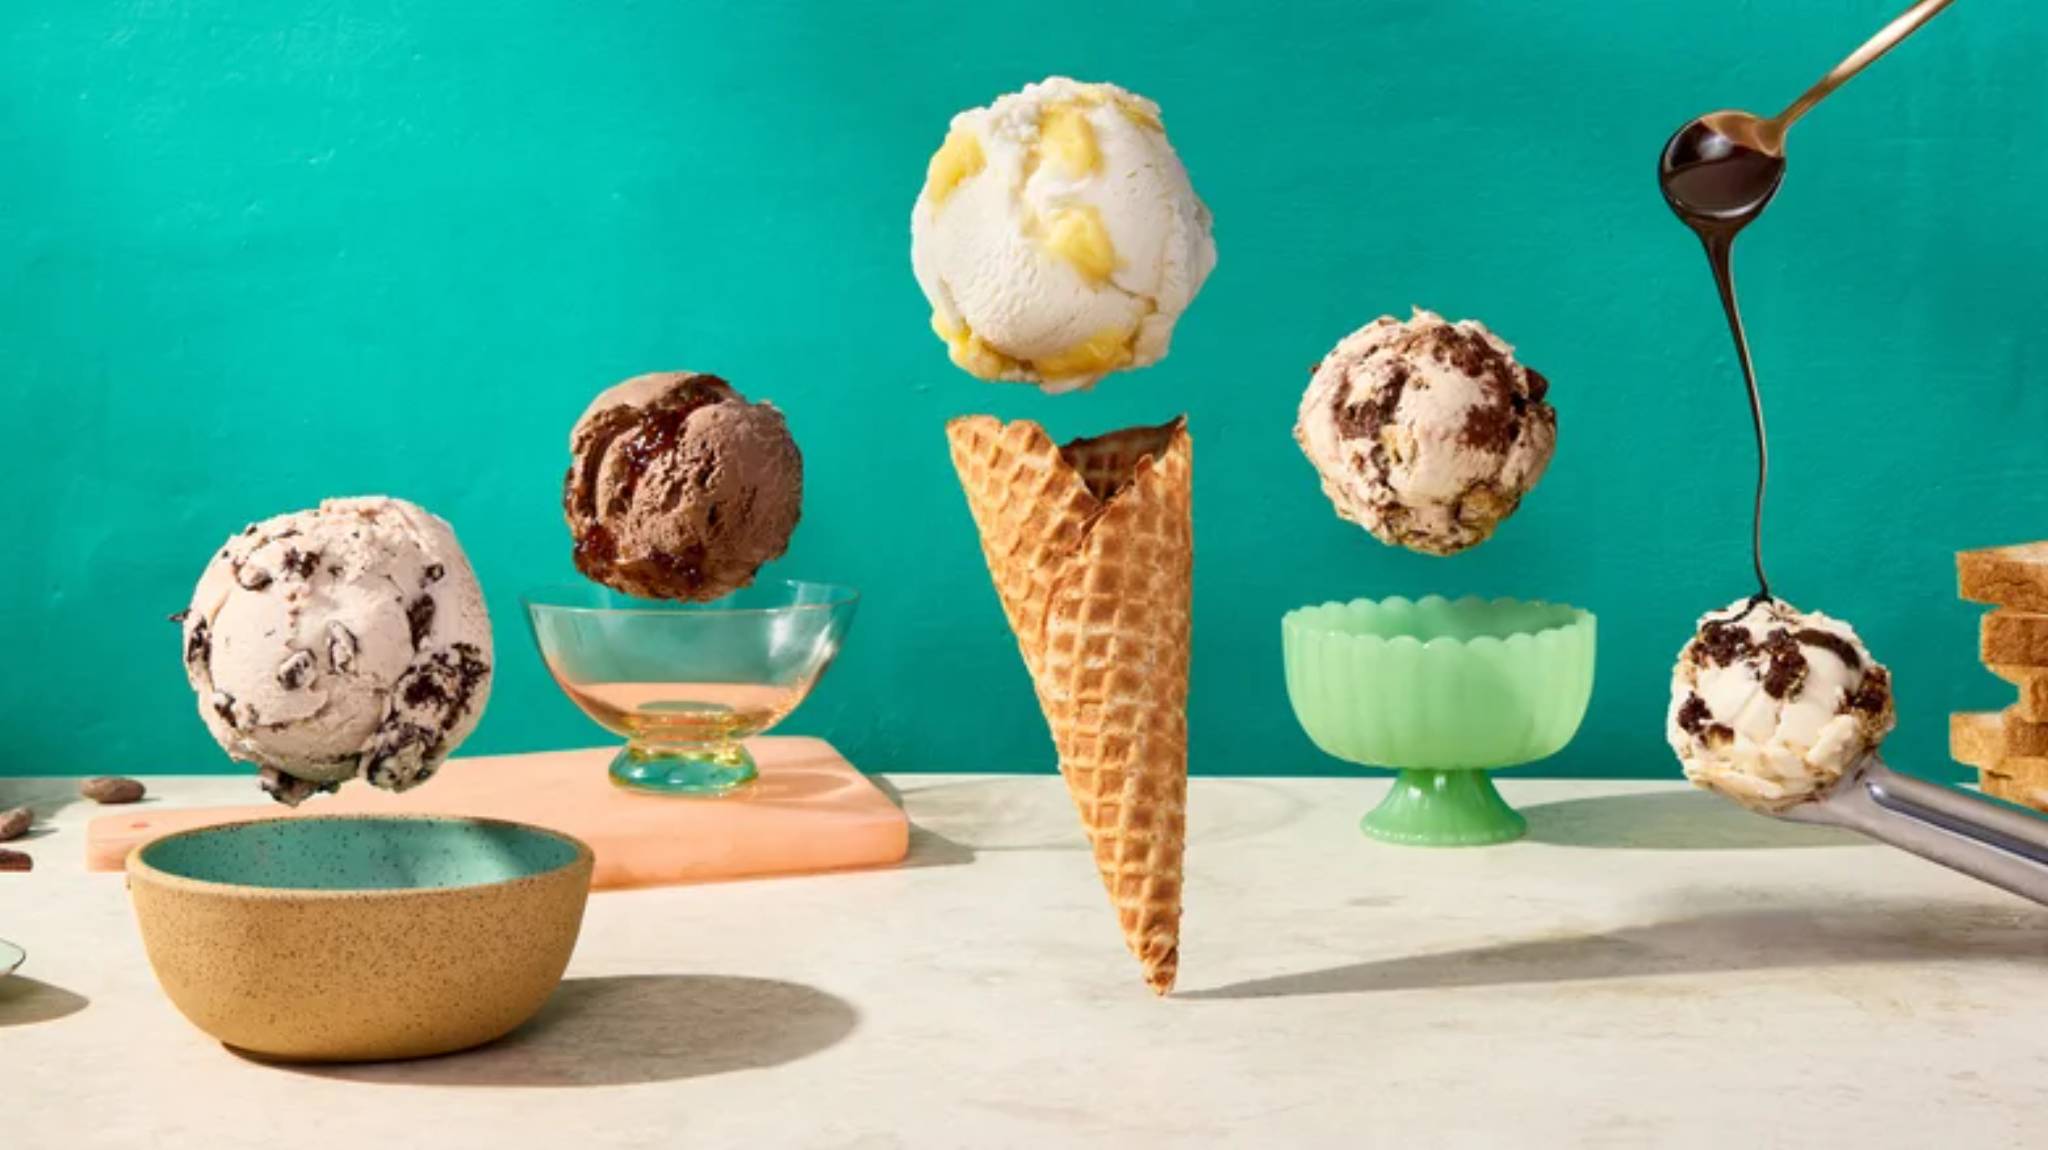 Salt & Straw debuts upcycled ice cream flavours